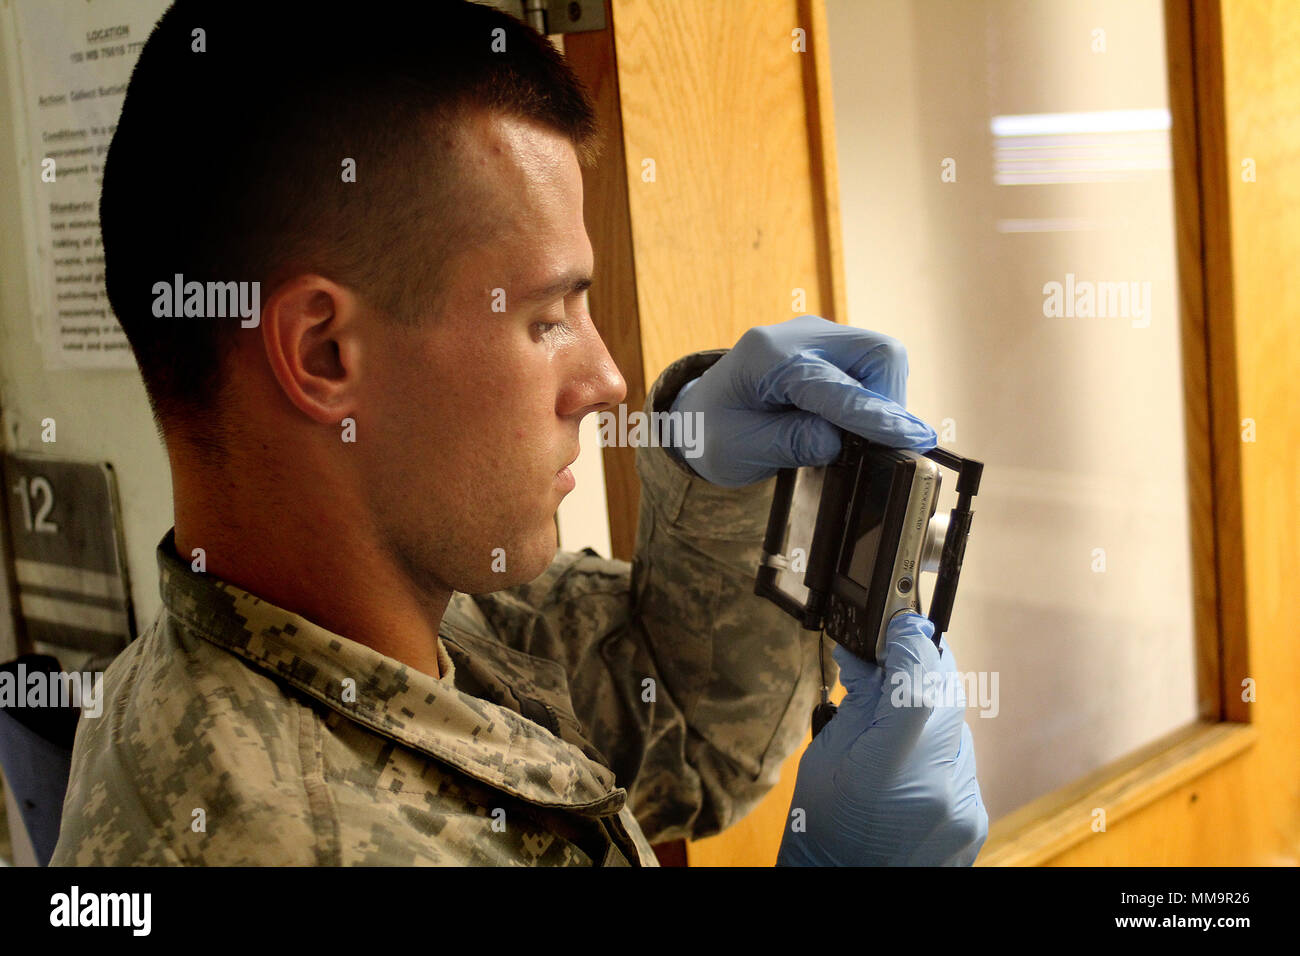 Arizona National Guardsman Sgt. Nicholas Jacobs photographs evidence during a forensic site exploitation exerise Sept. 18. Jacobs is one of 45 participants from across the U.S. Army to compete in the United States Army Military Police School's MP Competitive Challenge. (U.S. Army photo by Capt. Aaron Thacker) Stock Photo